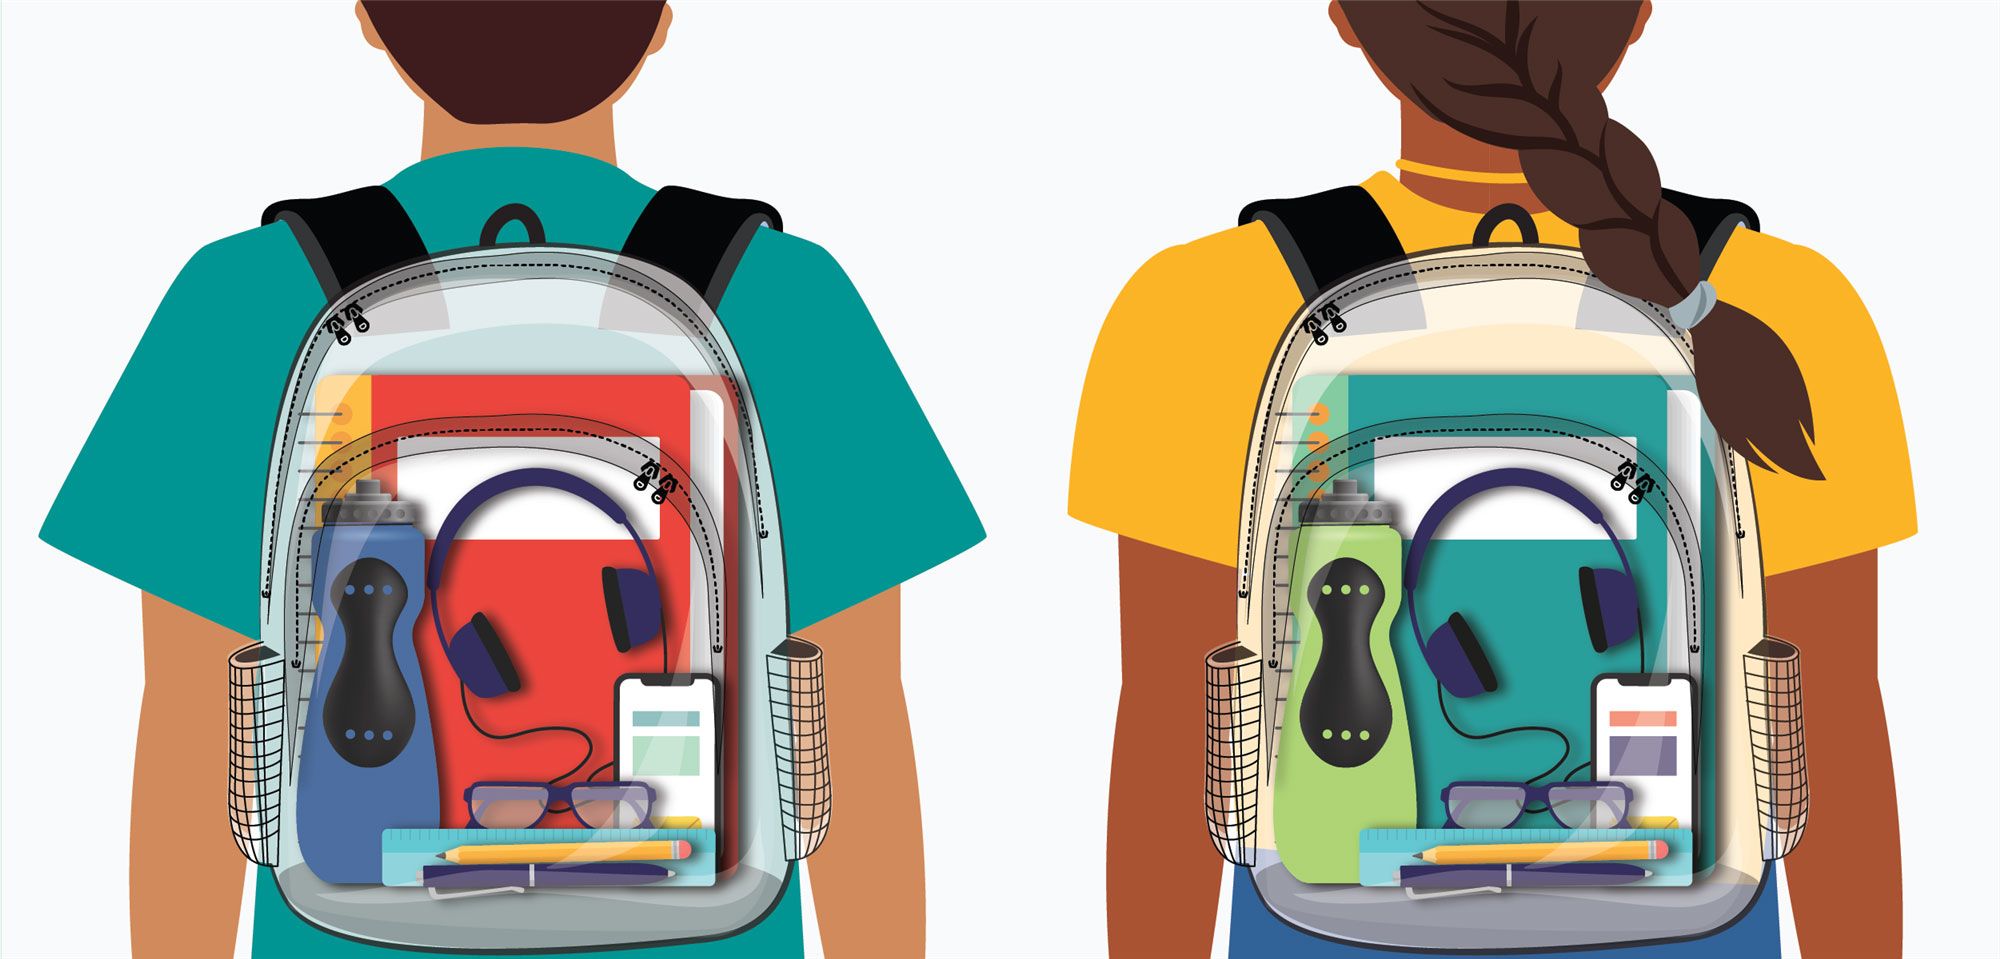 Texas school district to lock students' phones in a bag